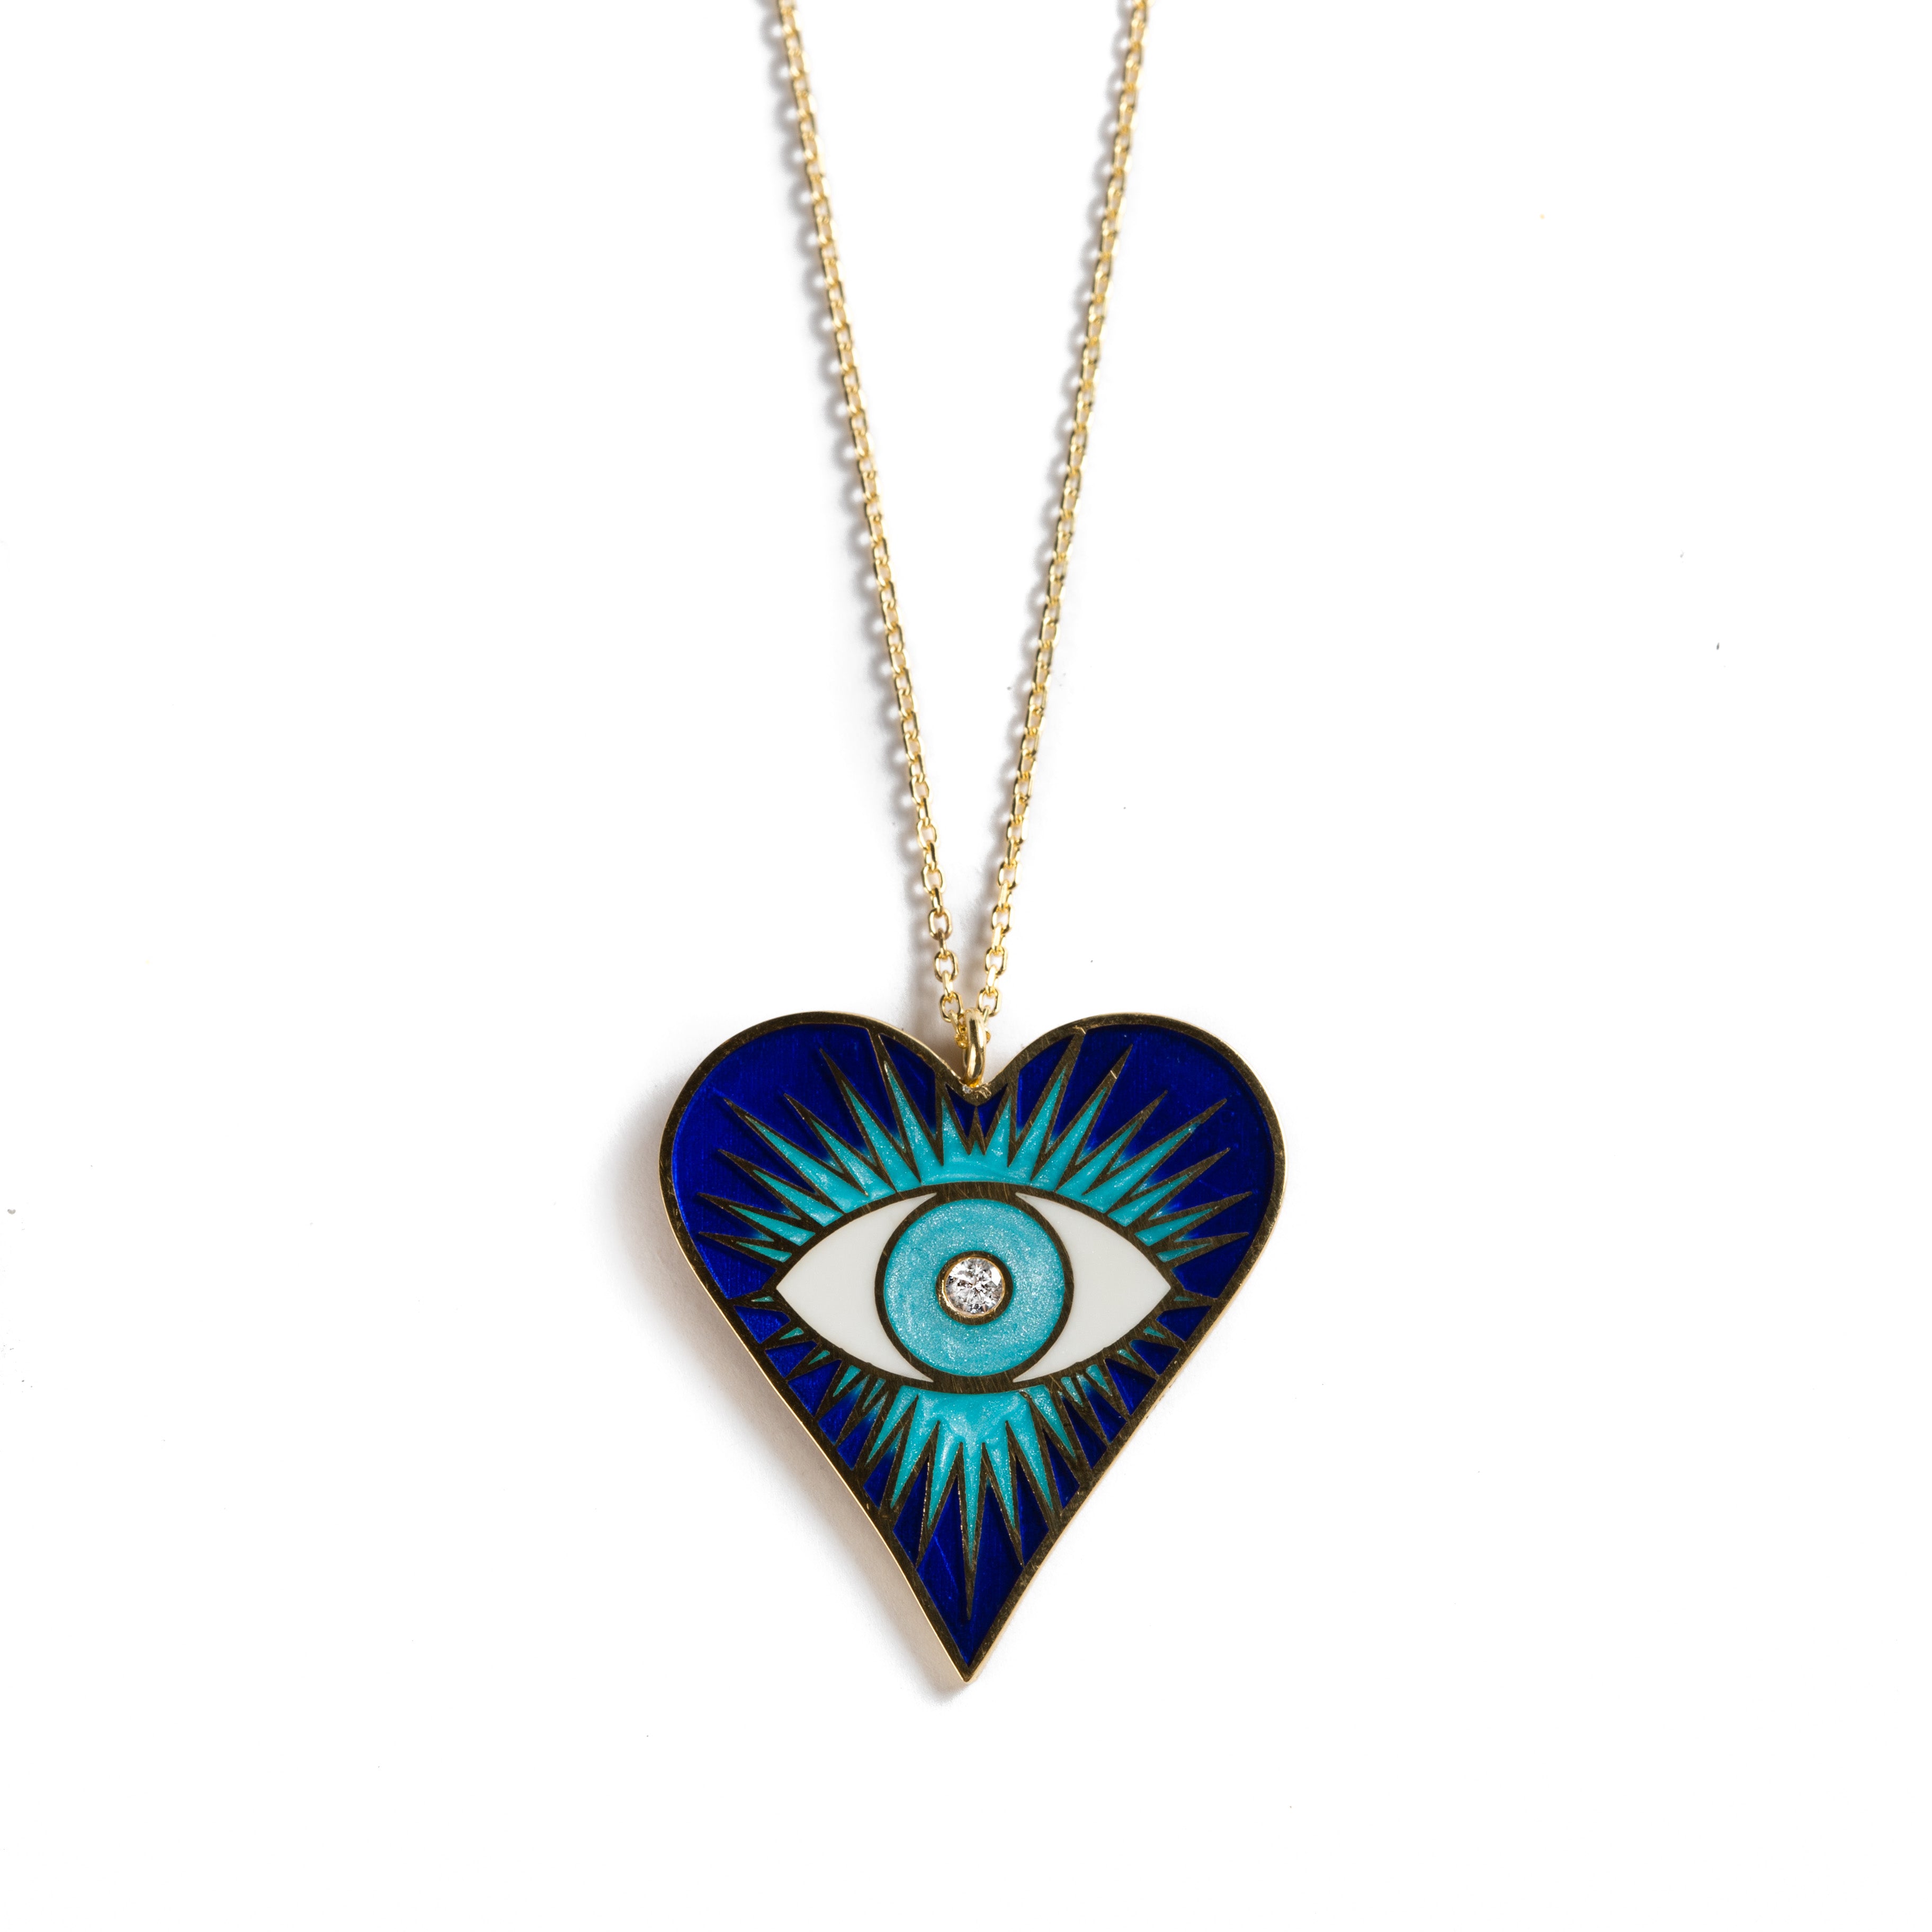 925 GOLD PLATED BLUE EVIL EYE HEART PENDANT WITH BABY BLUE AND WHITE ENAMEL